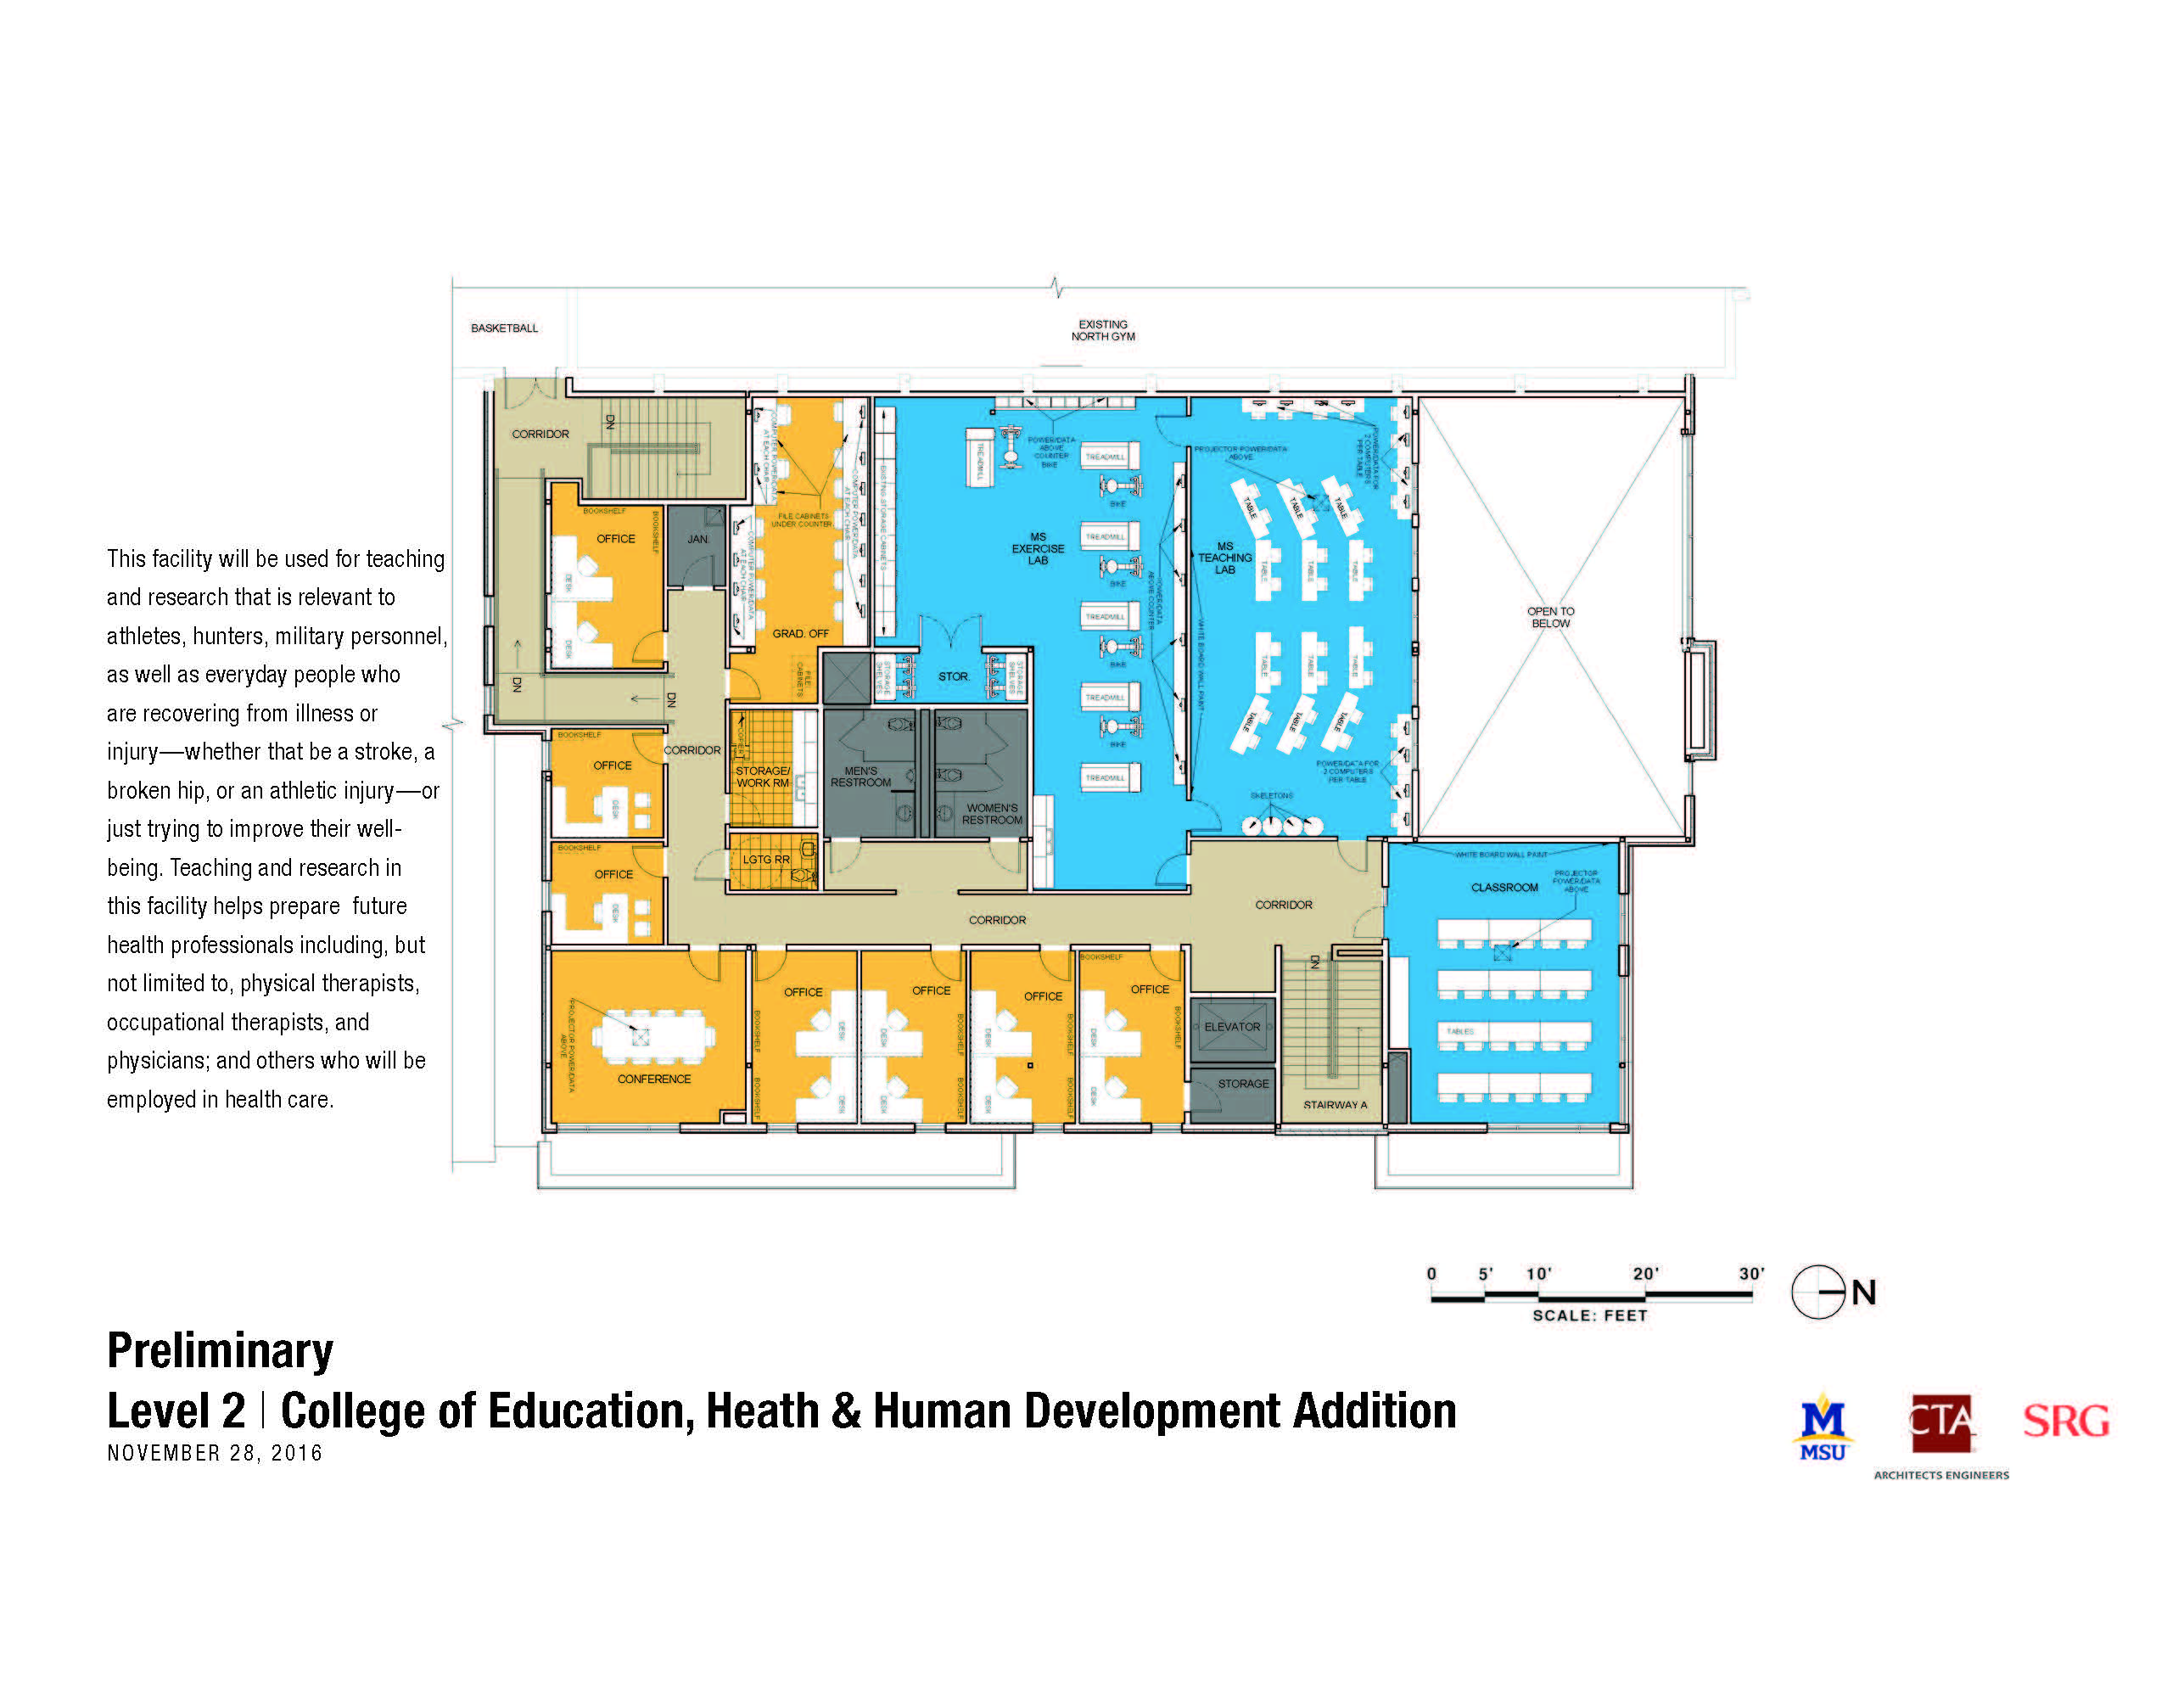 Preliminary floor plan design for Level 2 of a College of Education, Health and Human Development addition